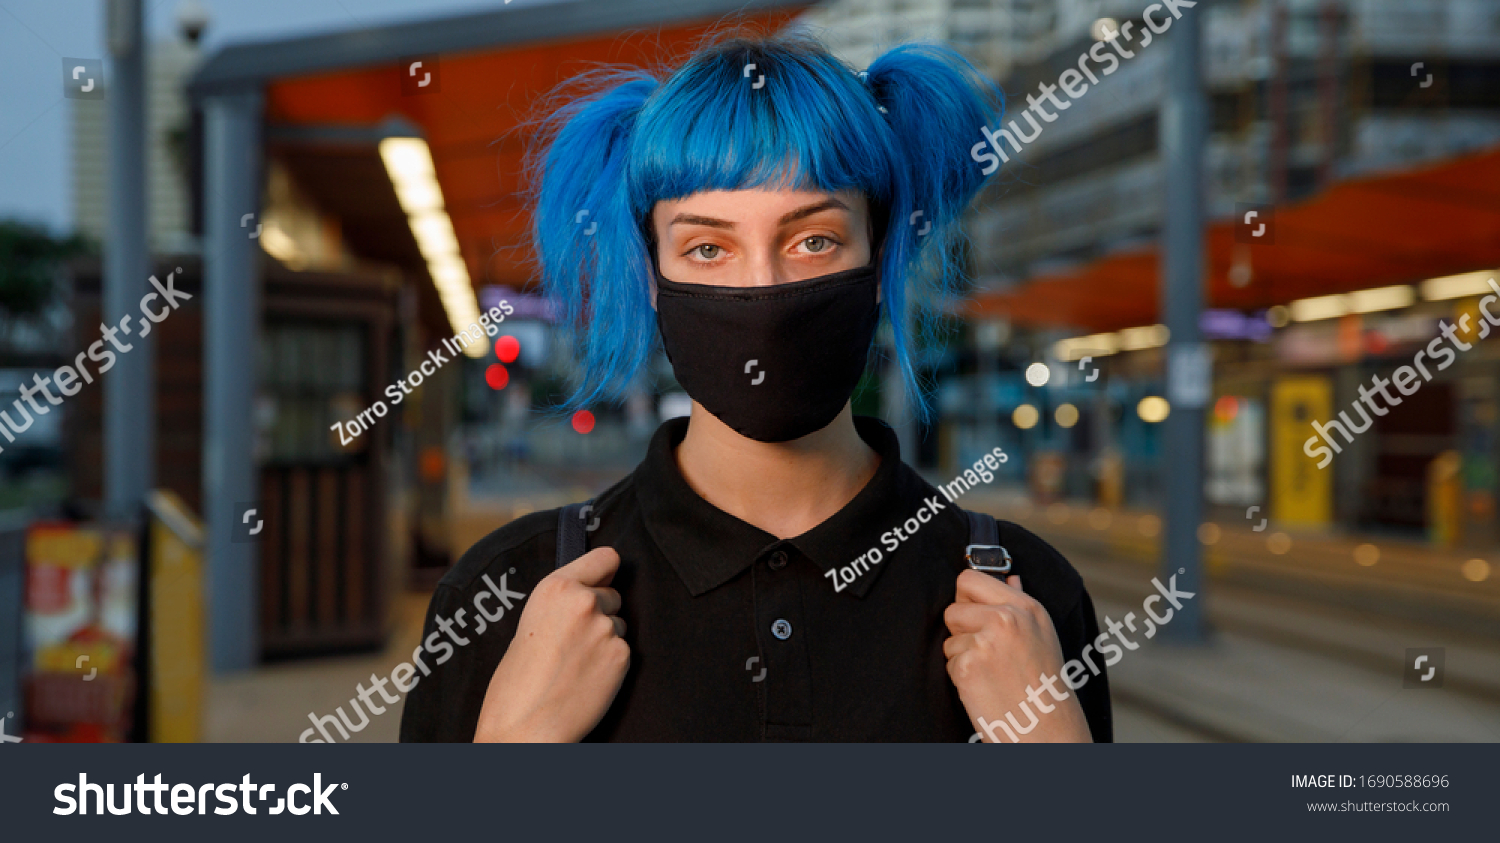 coronavirus fashionable medical face mask worn by young female student with blue anime style hair at tram stop on city street on dusk, stop covid 19 pandemic or air pollution concept, panorama banner #1690588696